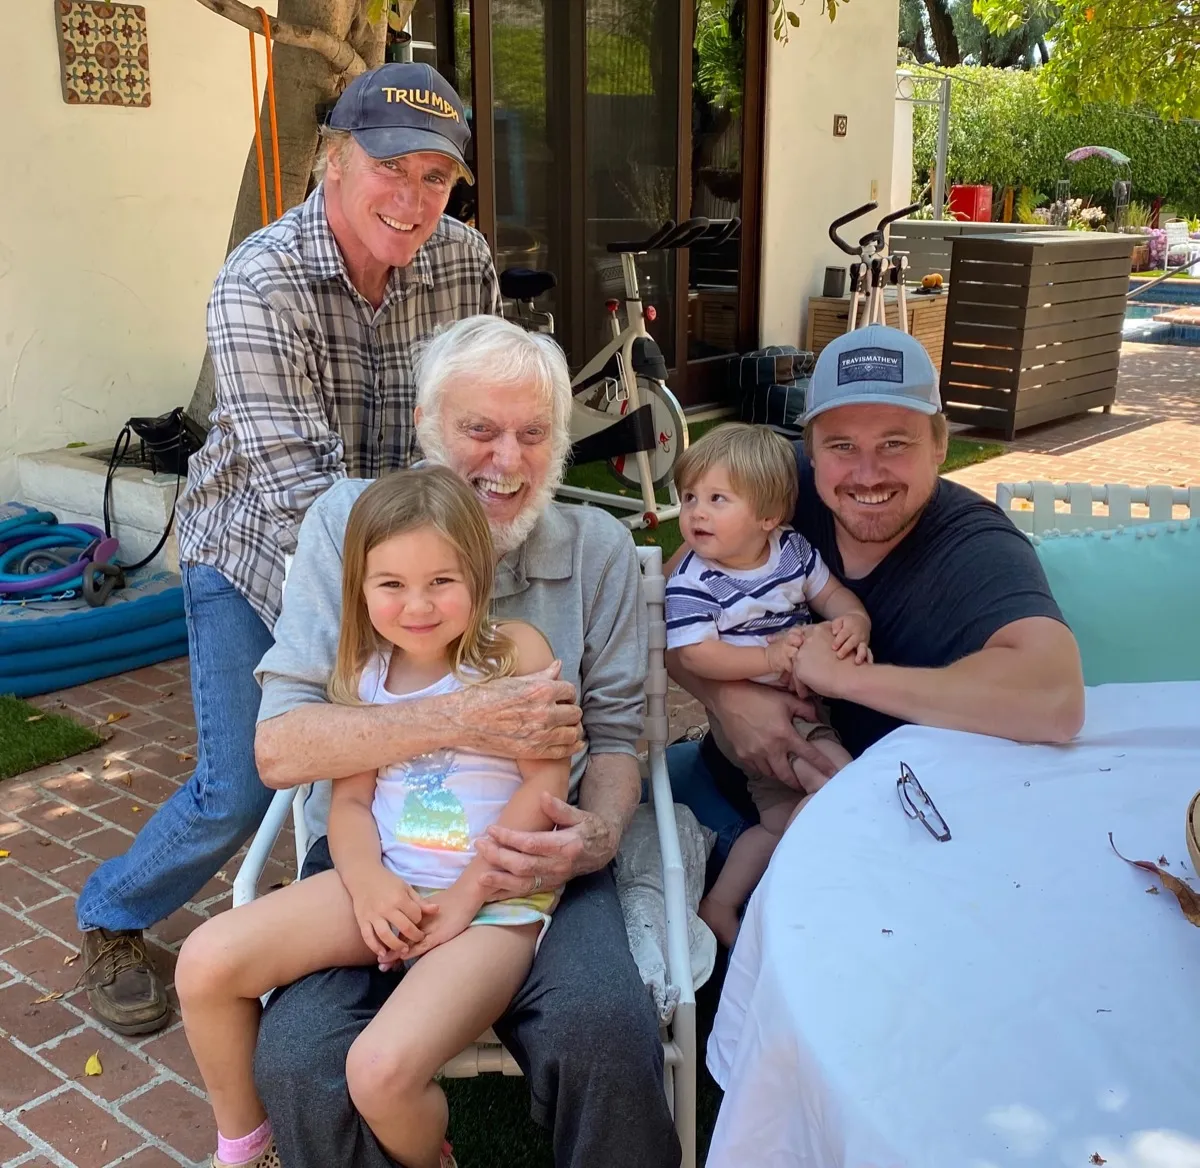 Barry Van Dyke with father Dick, son Wes, and grandchildren Kyla and Conor